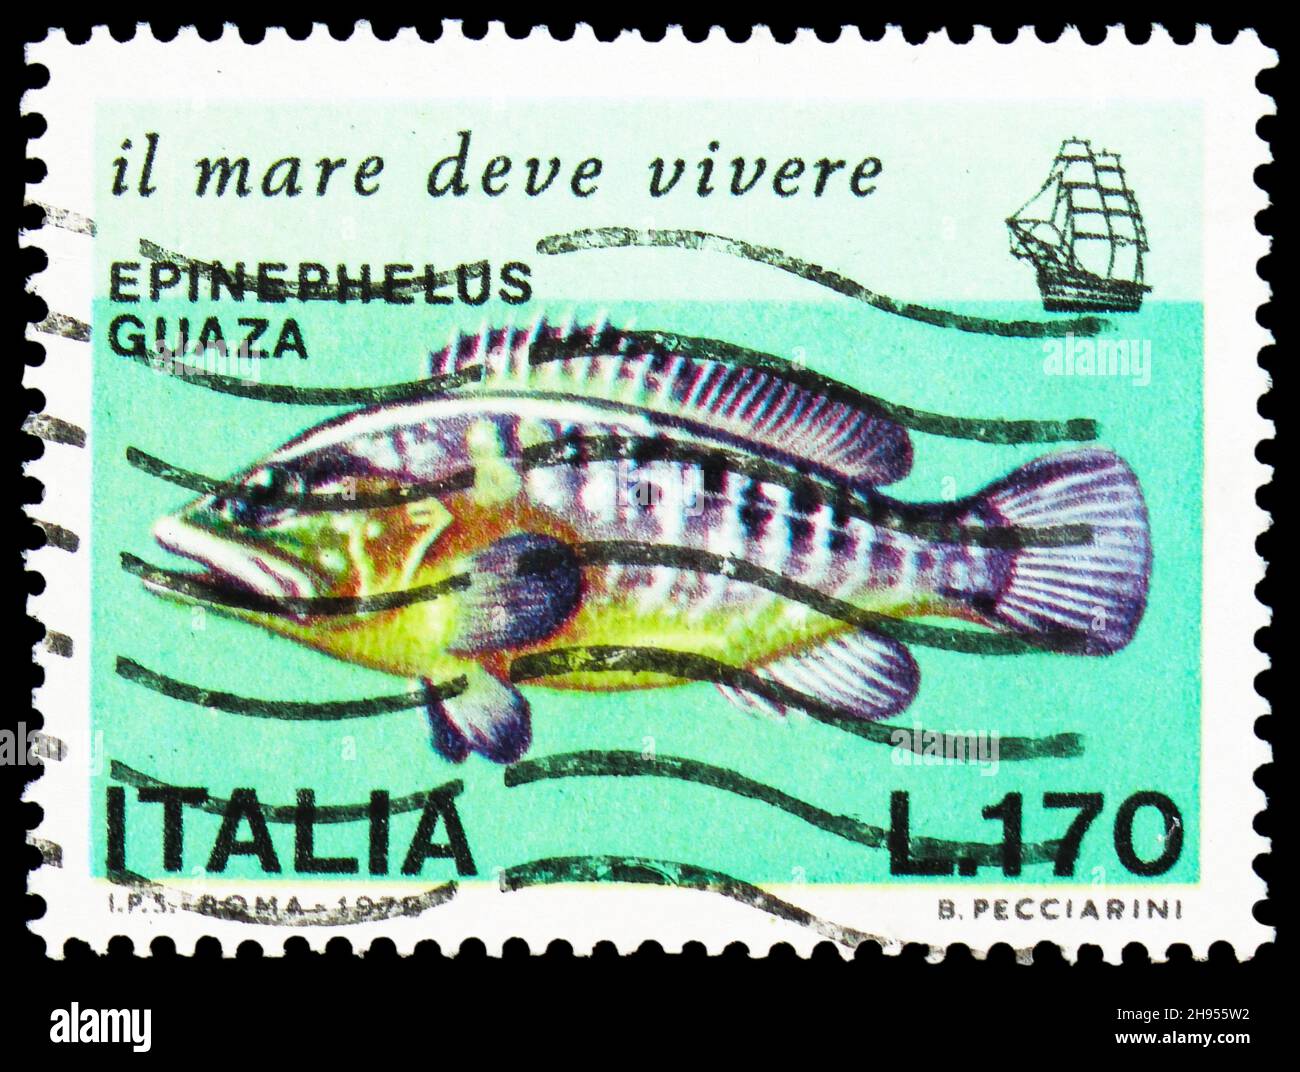 MOSCOW, RUSSIA - OCTOBER 24, 2021: Postage stamp printed in Italy shows Dusky Grouper (Epinephelus guaza), Rare Animals of the Mediterranean serie, ci Stock Photo